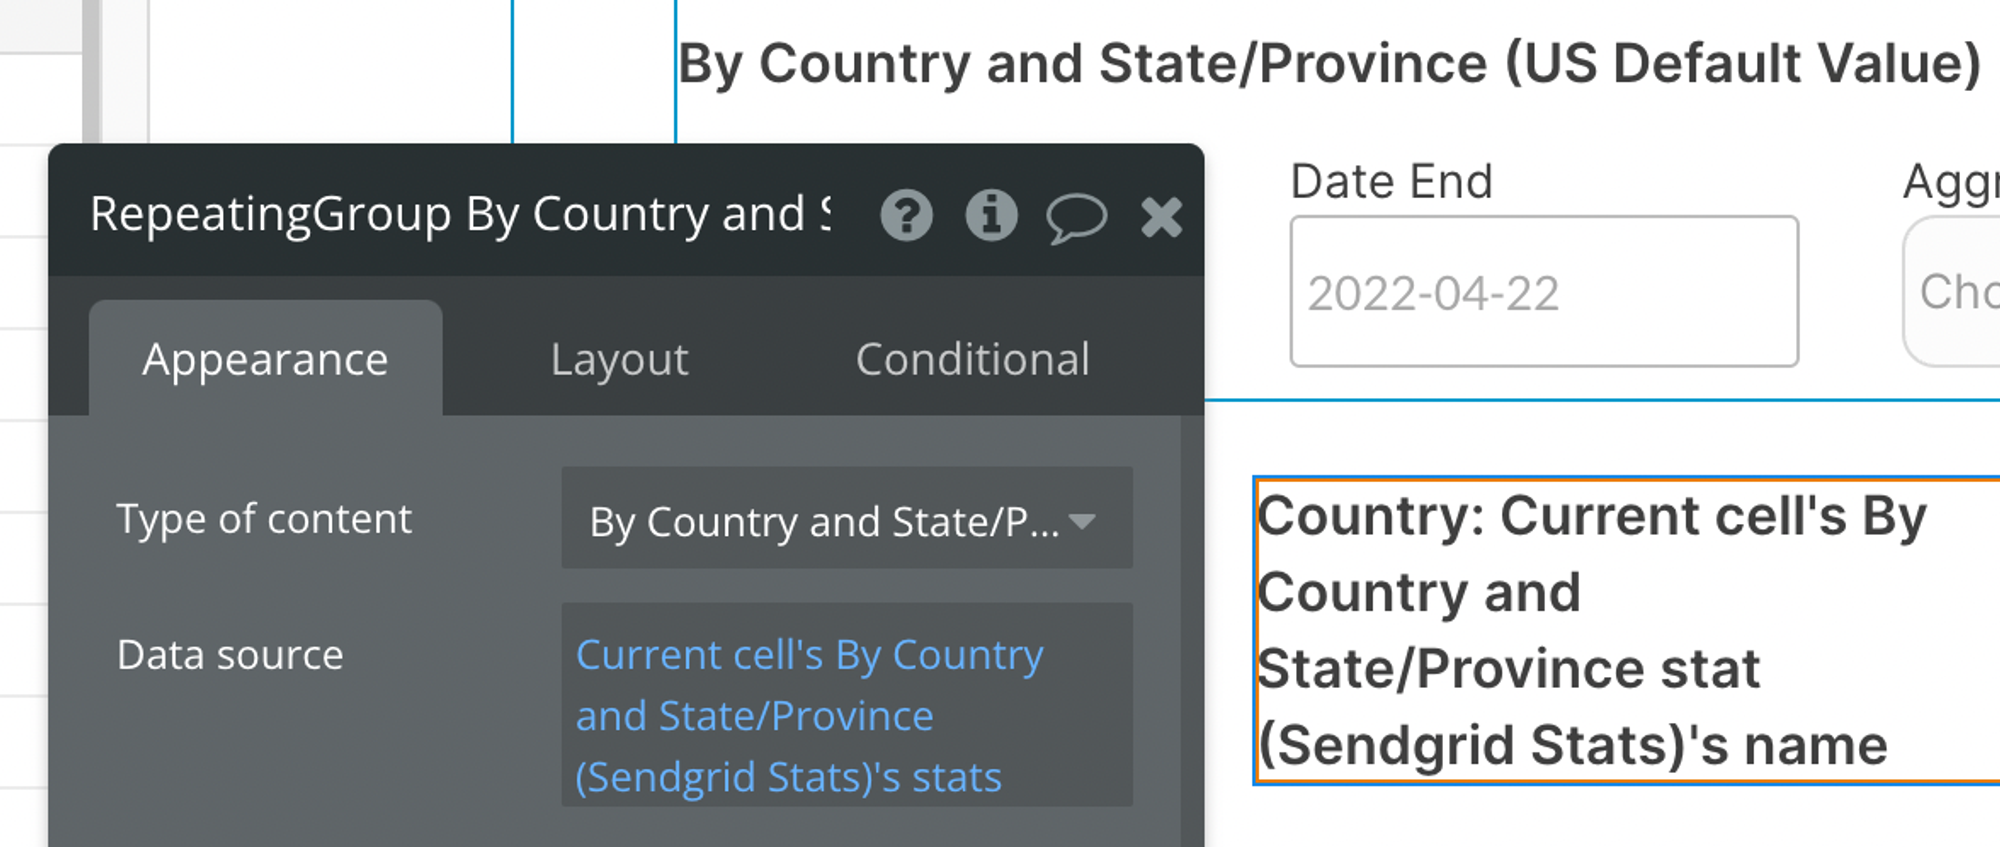 Select the type of content called: By Country and State/Province stat (SendGrid Stats)